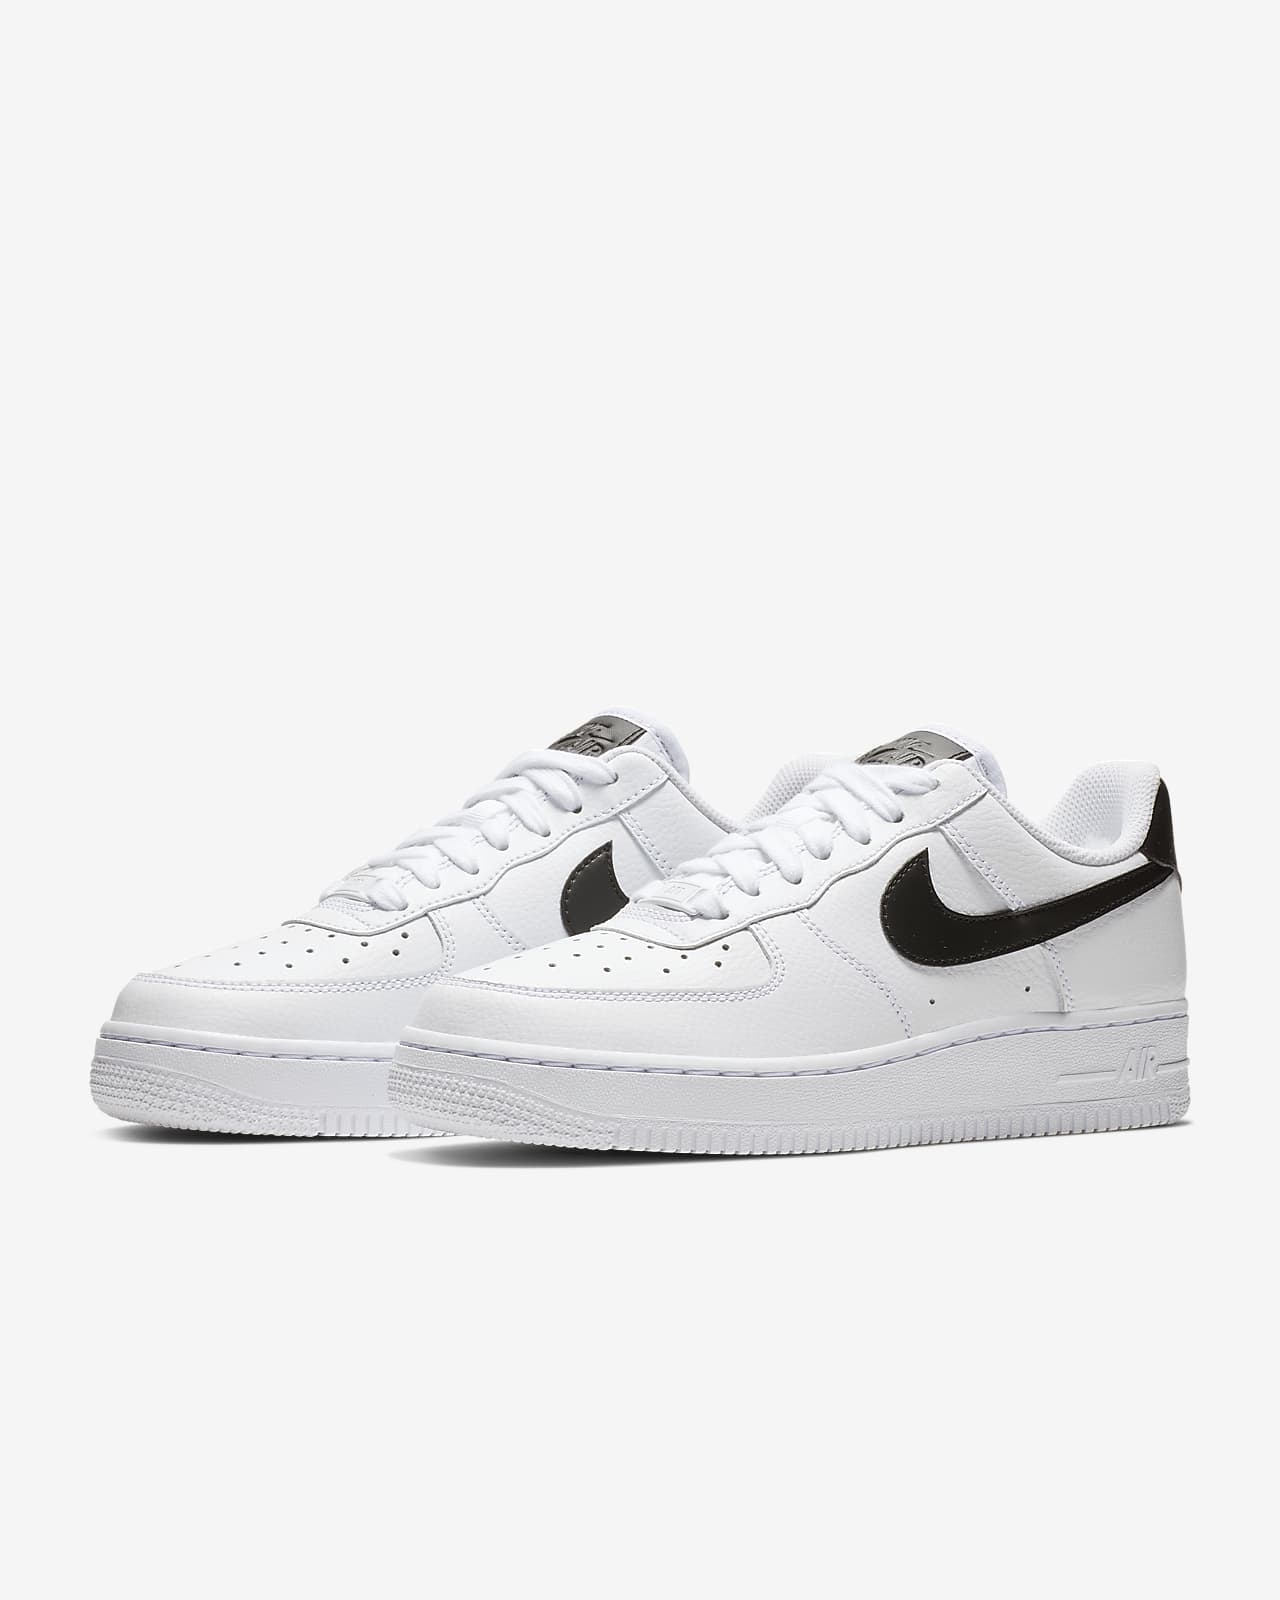 air force 1 size 7 women